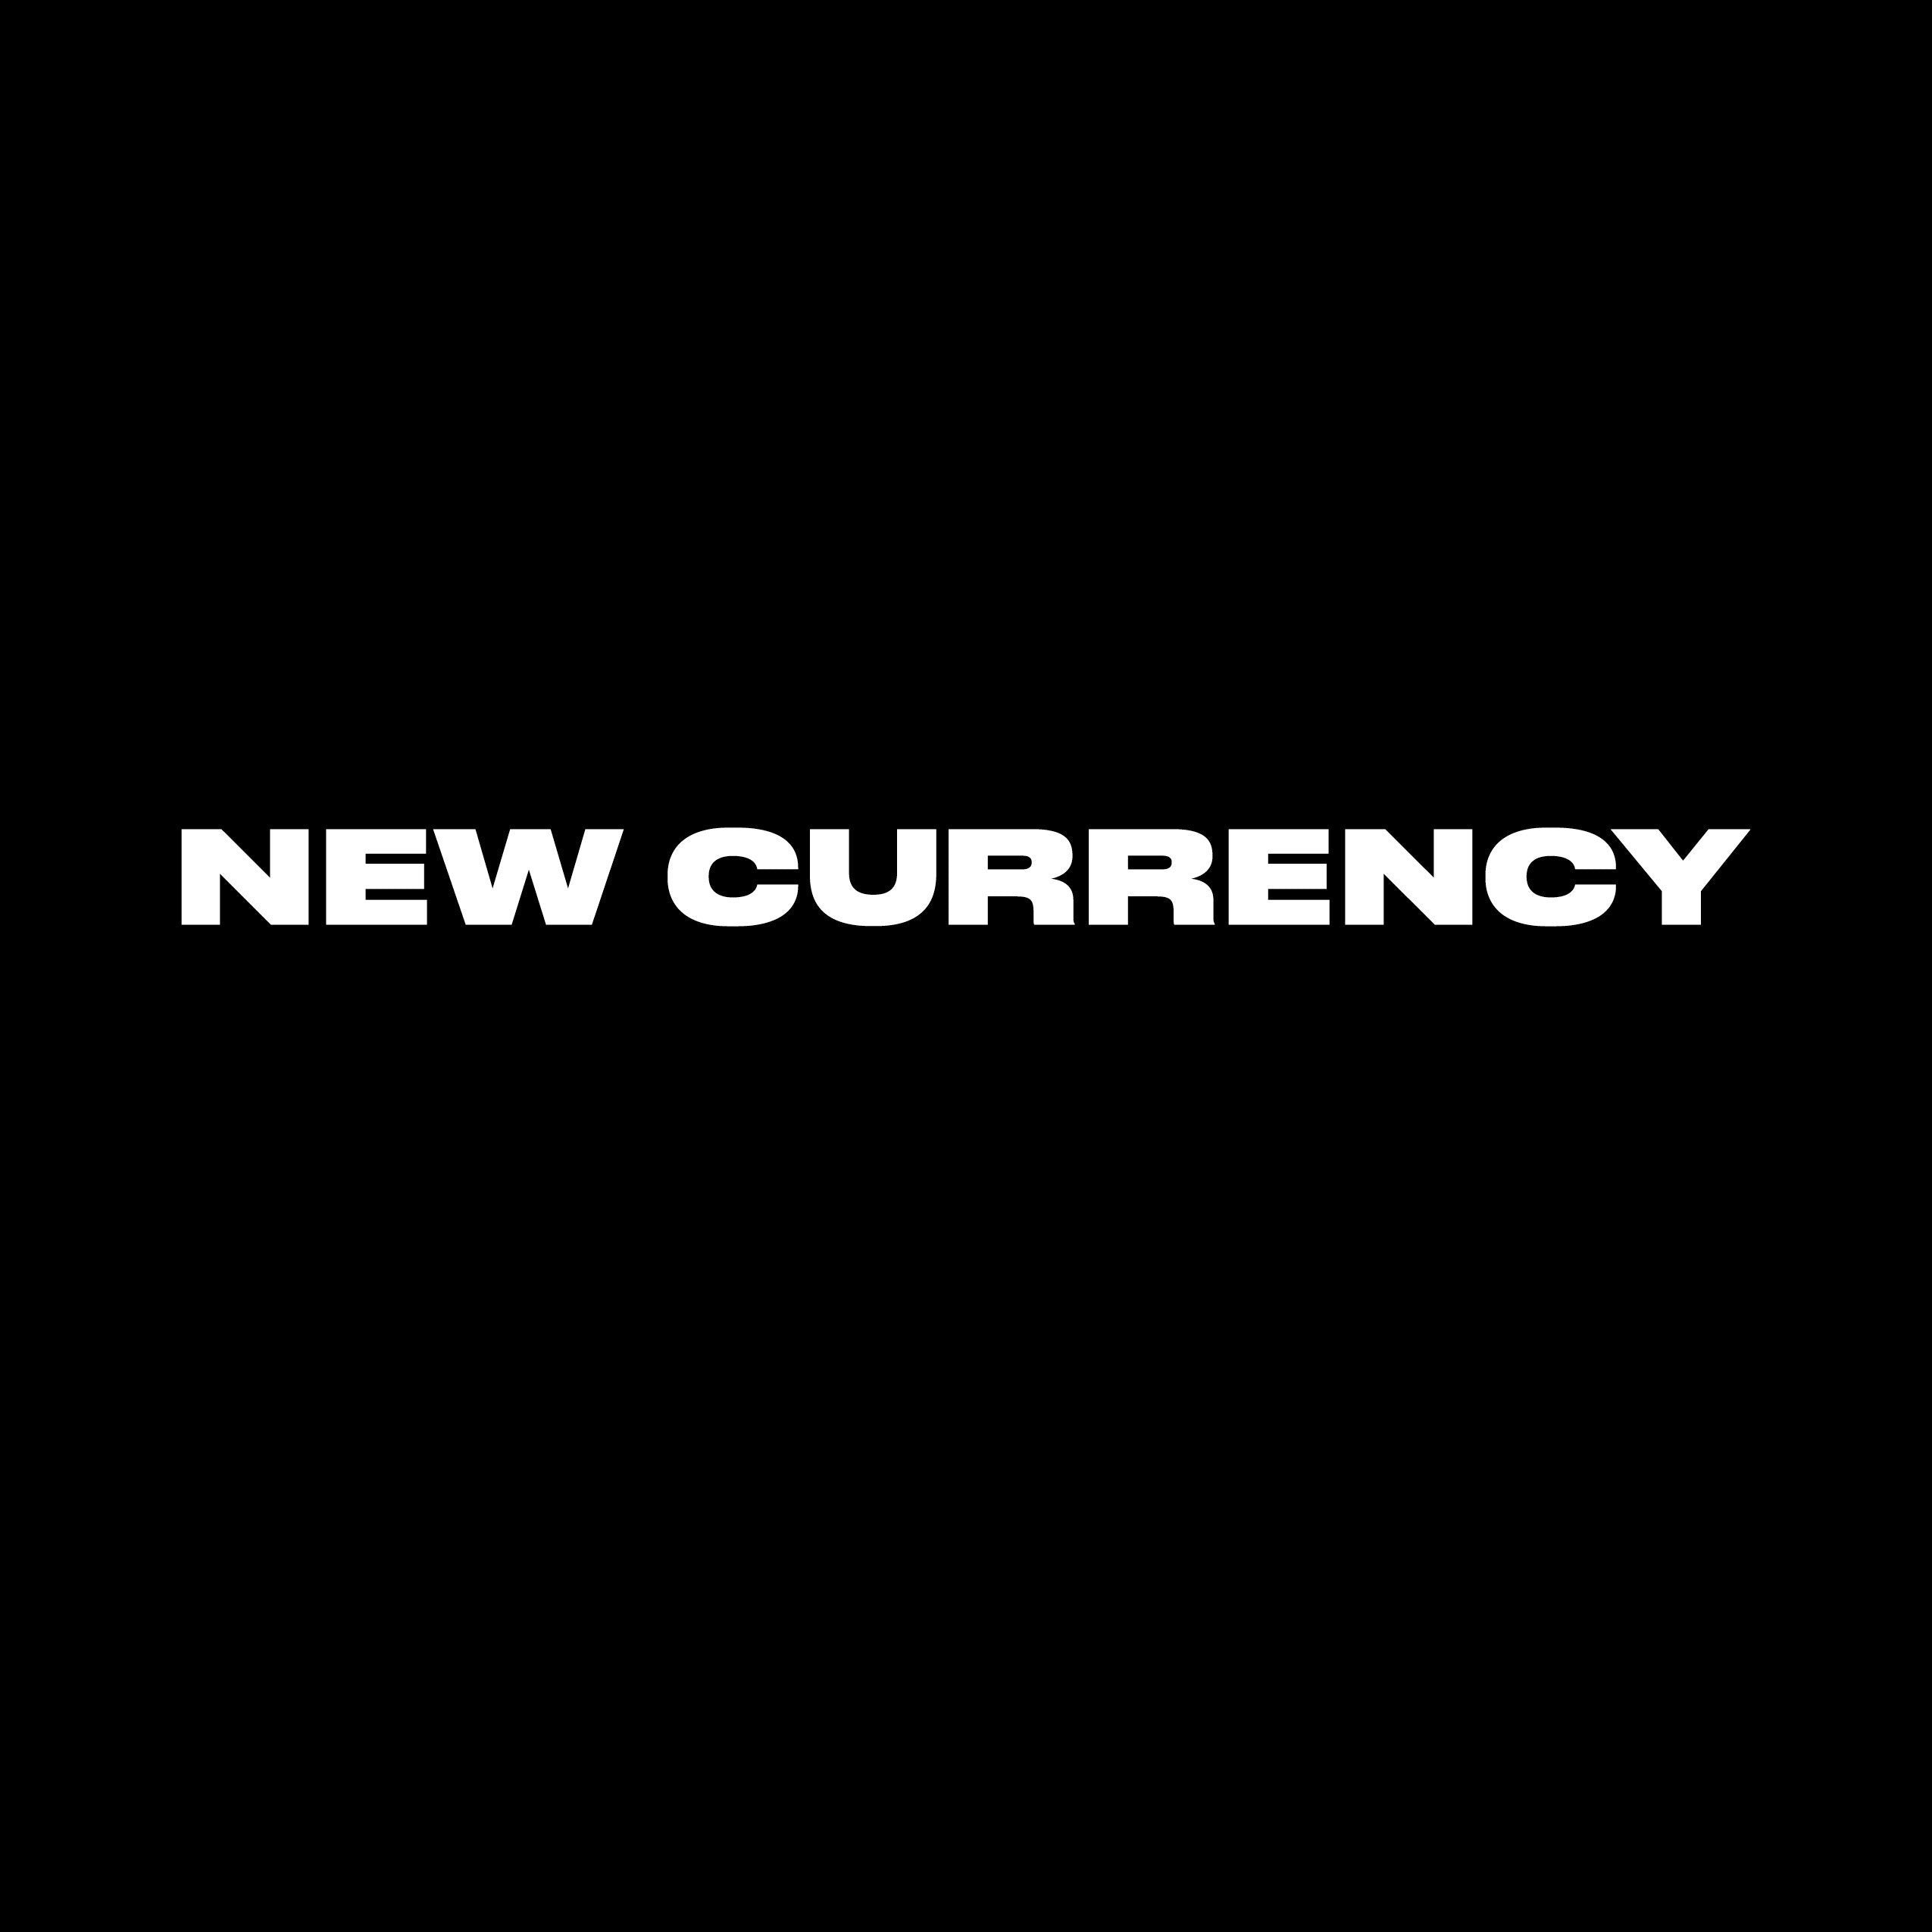 New currency